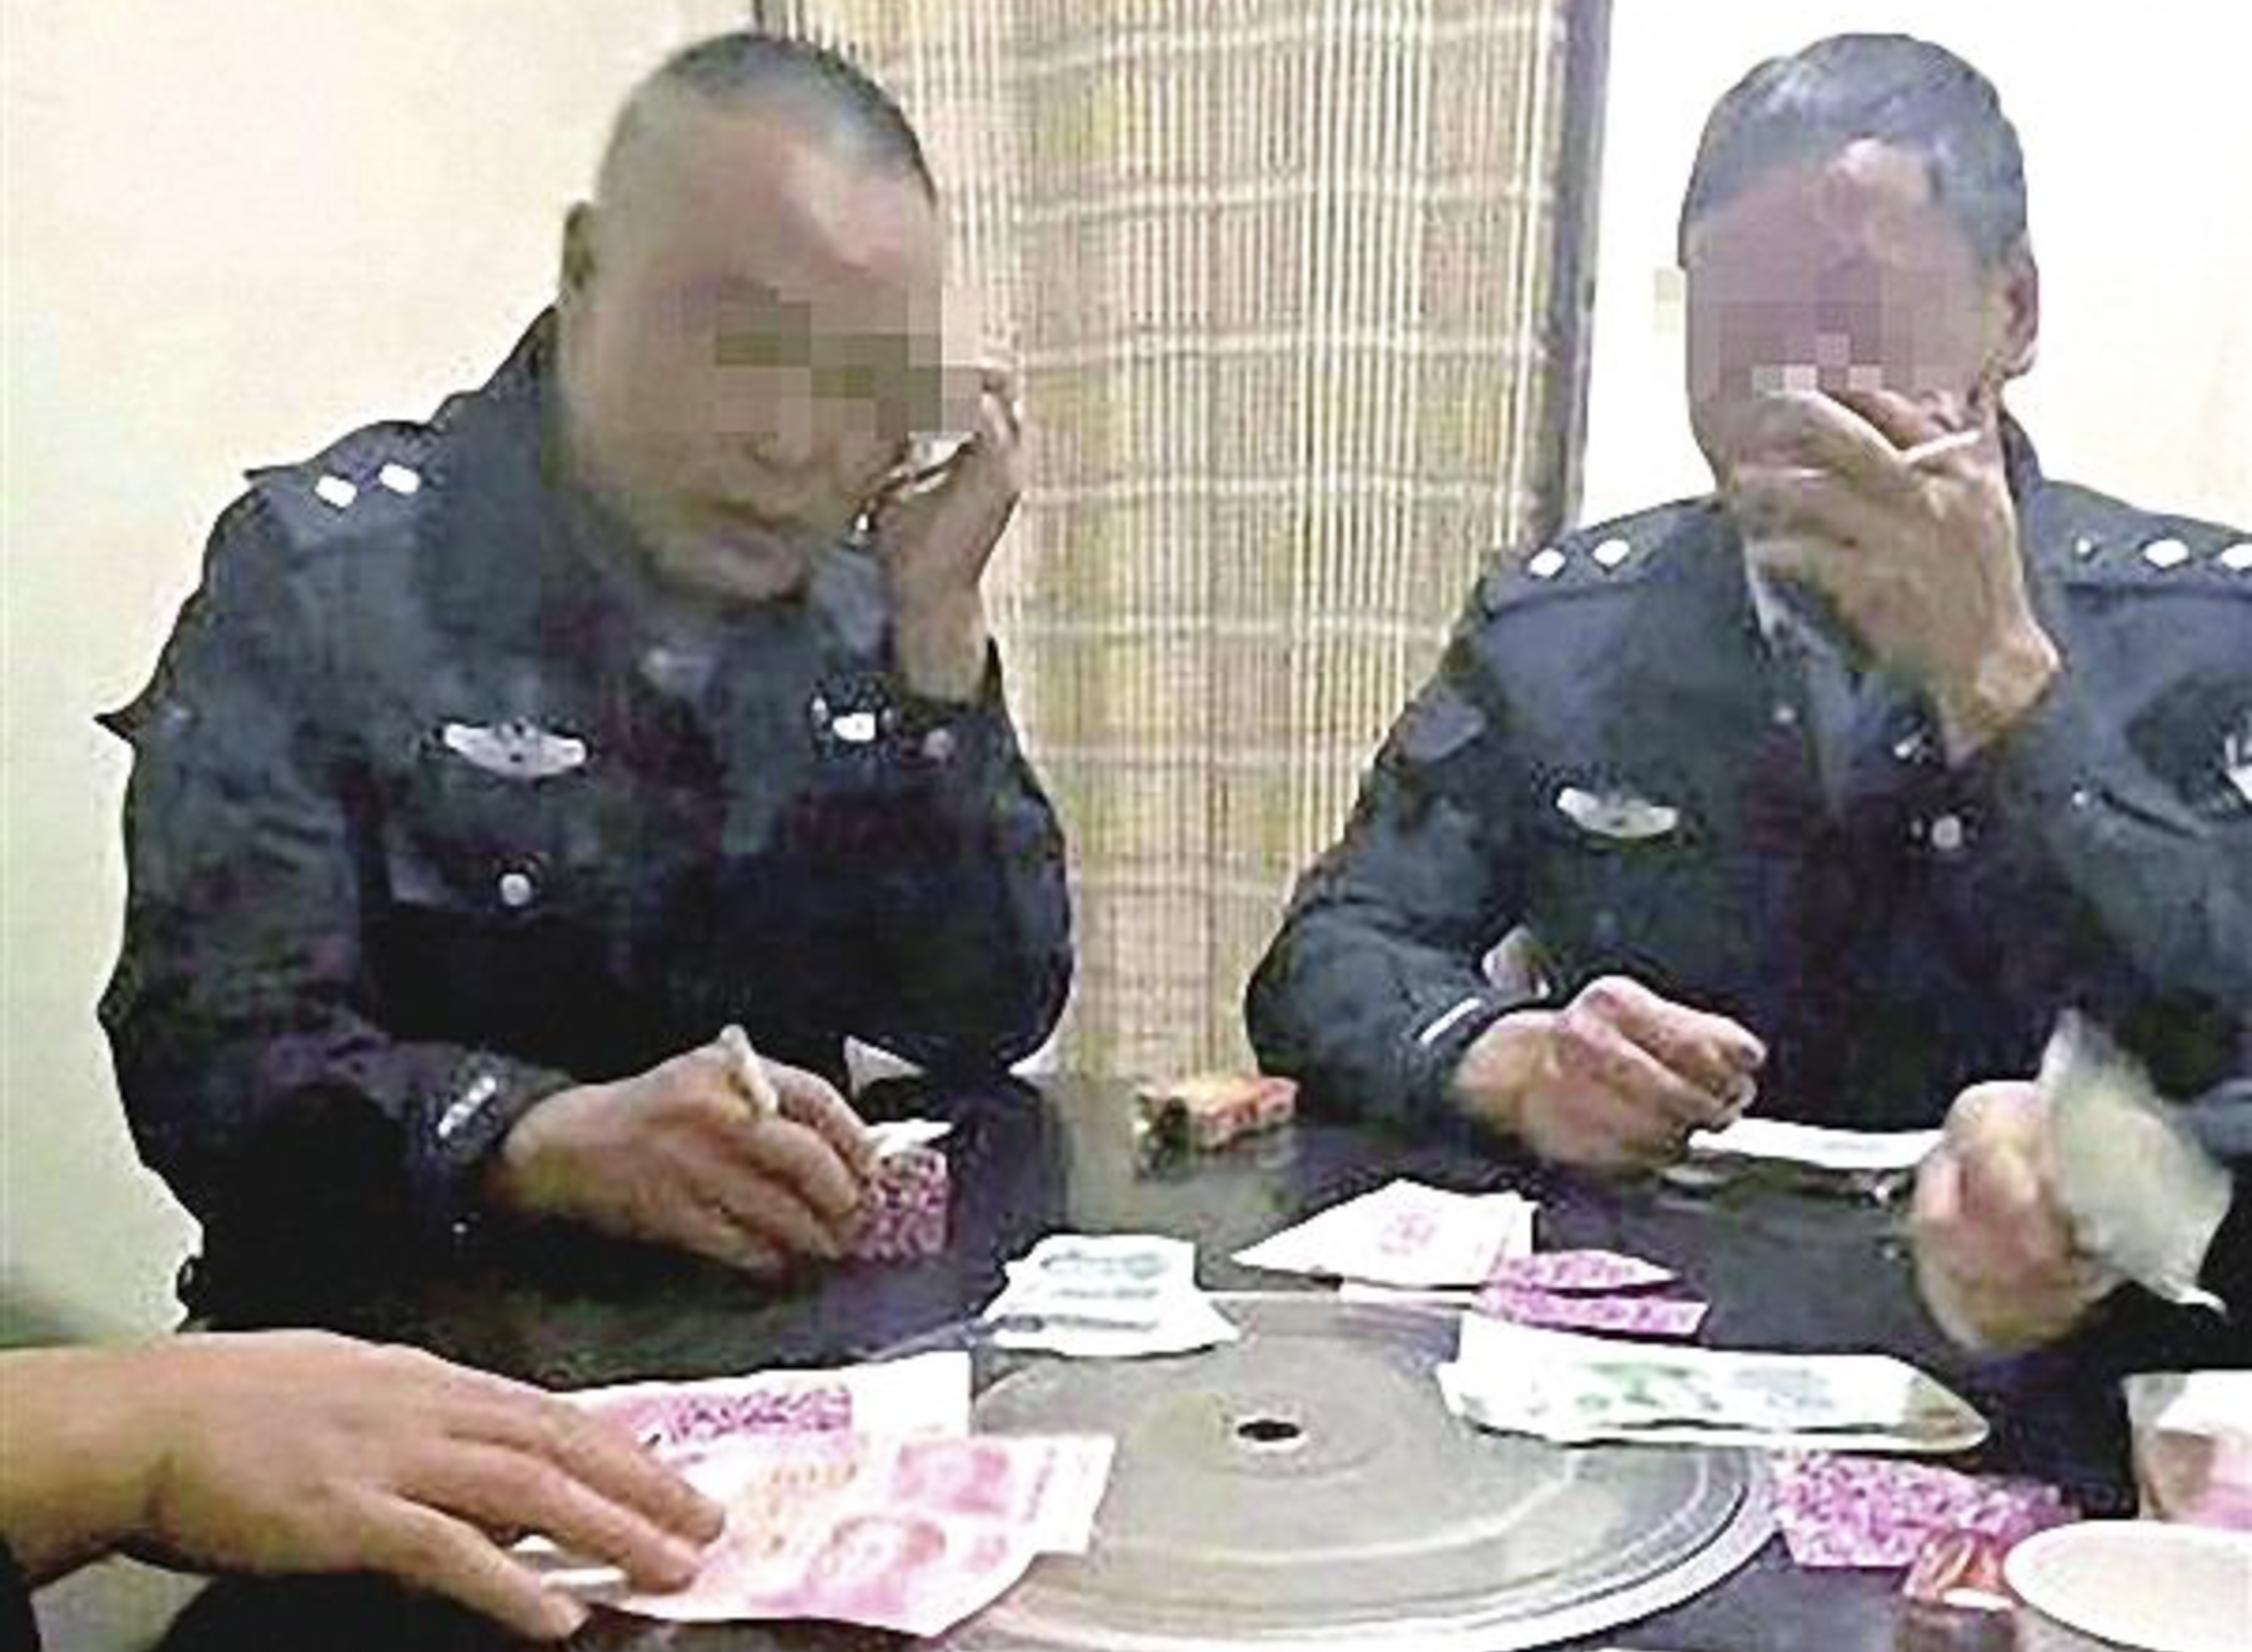 Four uniformed urban inspectors were detained after footage of them gambling surfaced online. Photo: Thepaper.cn